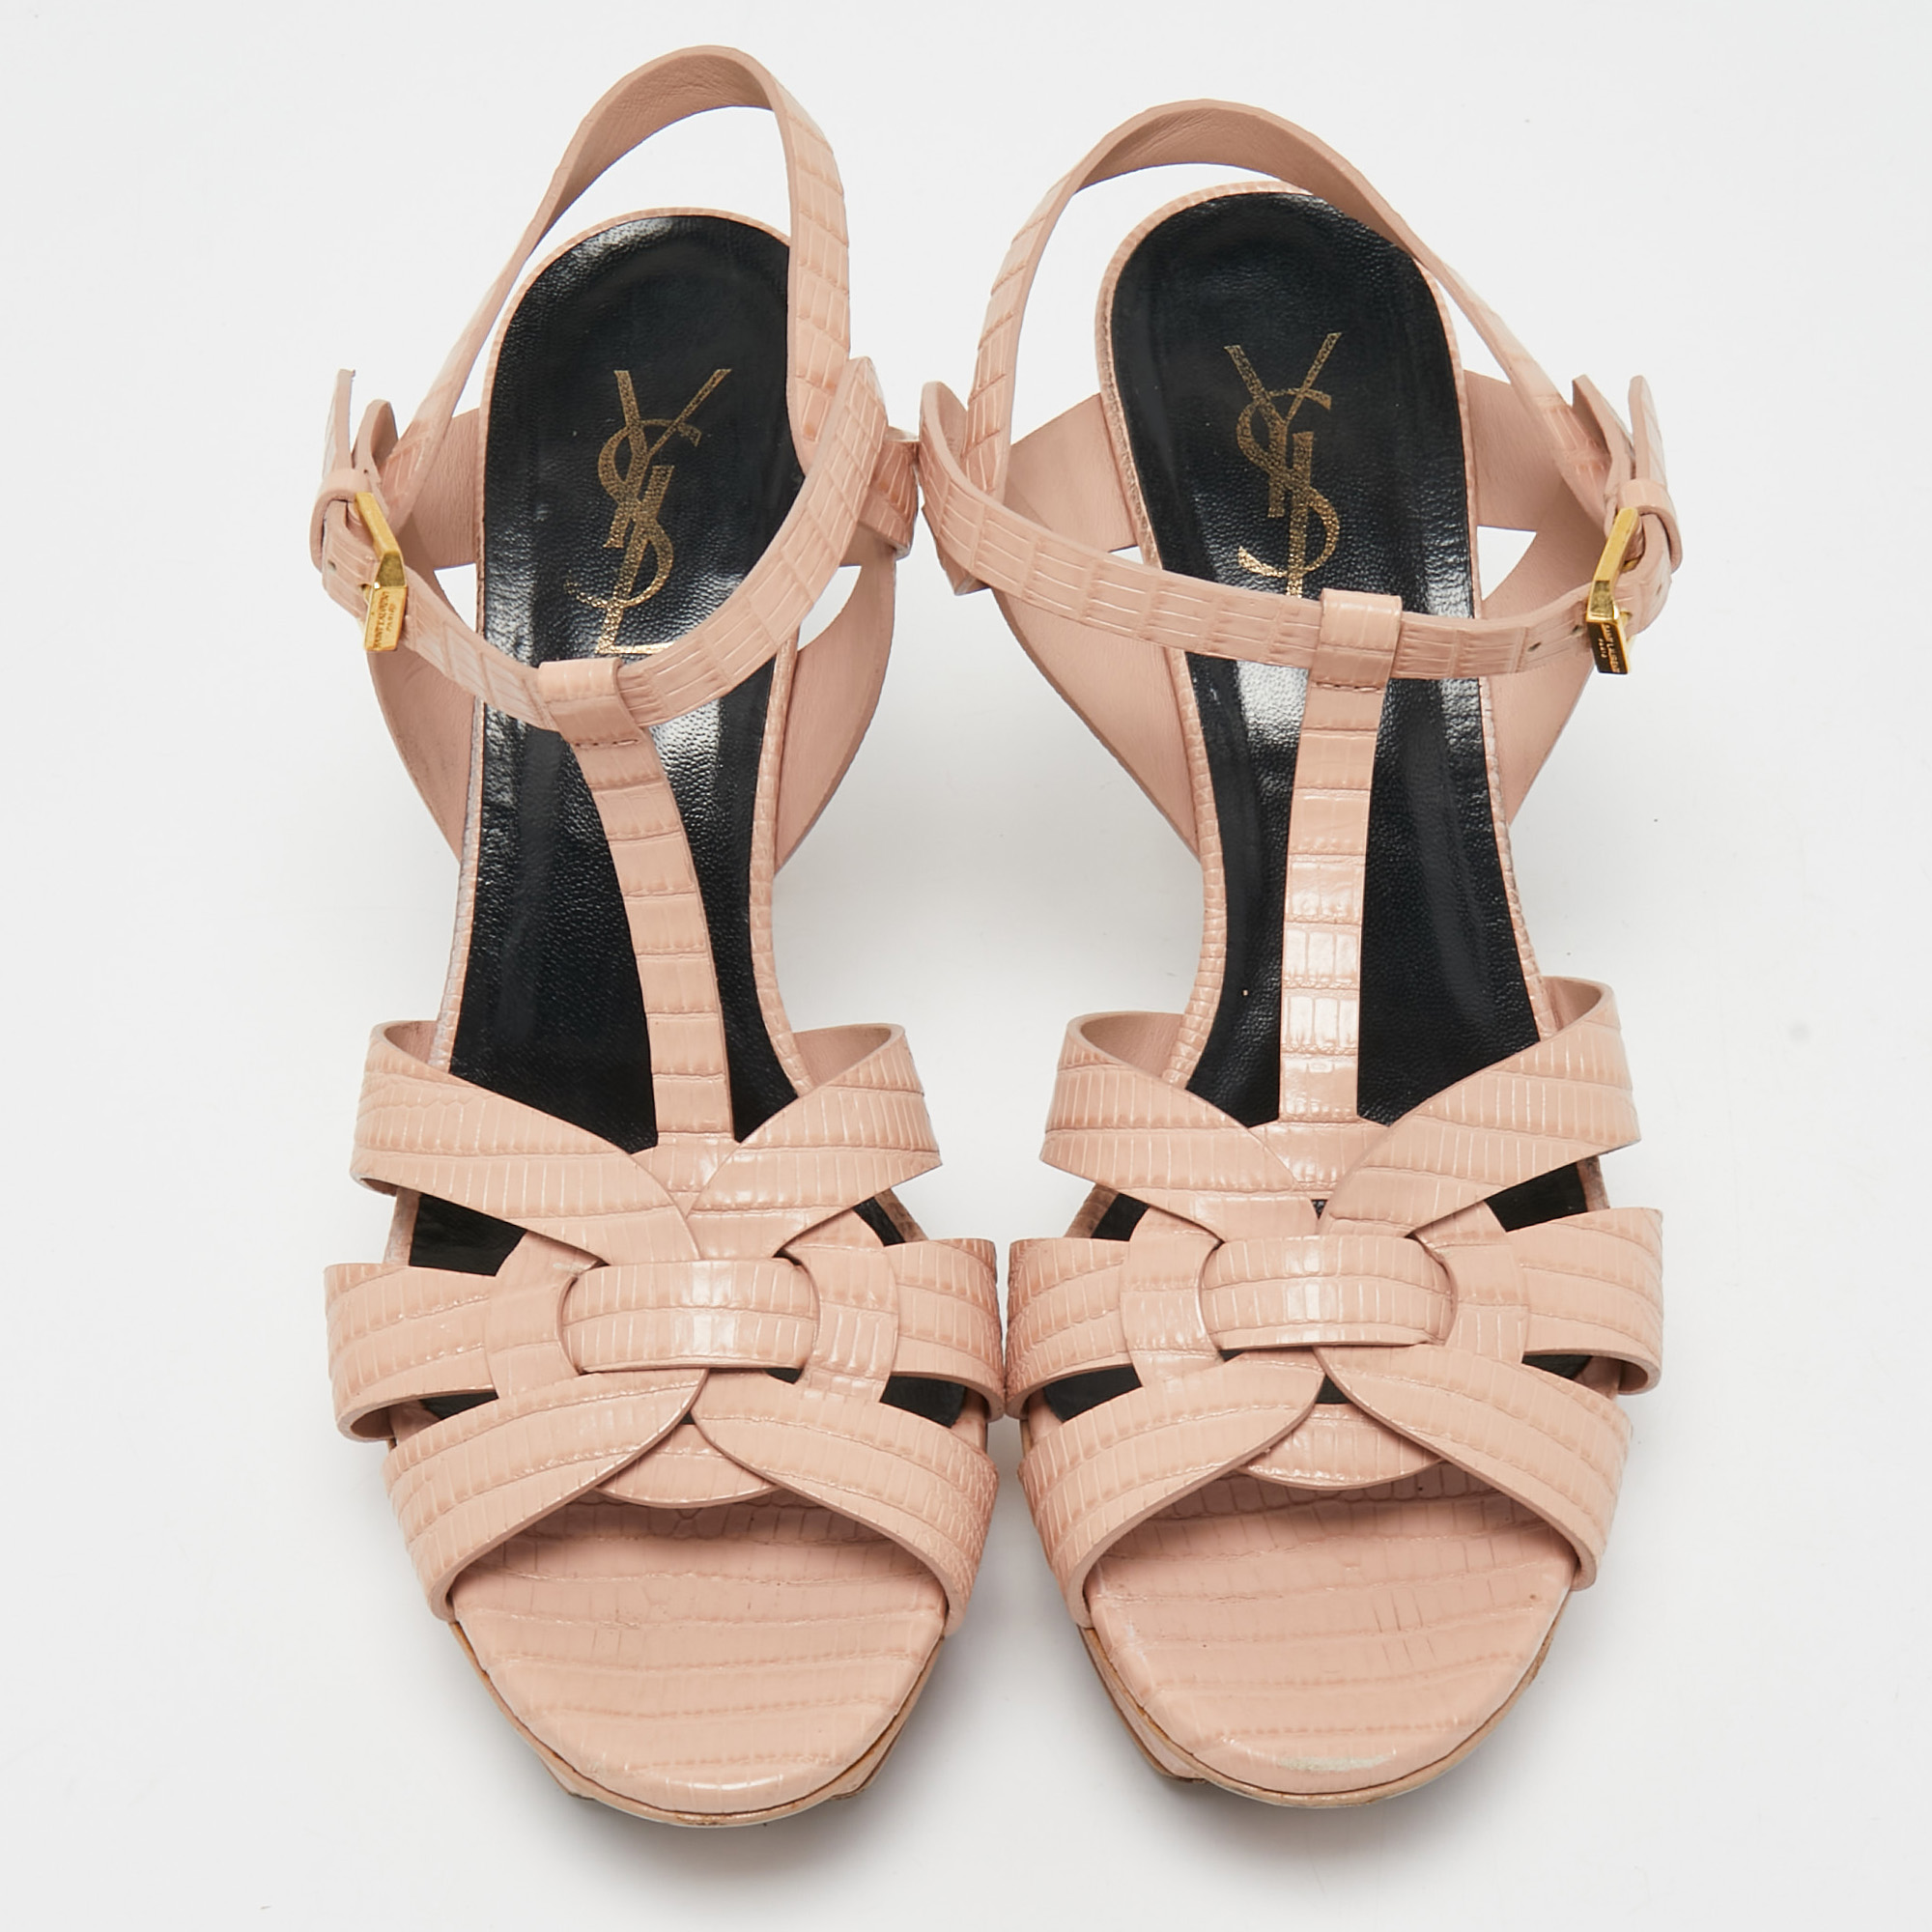 Yves Saint Laurent Pink Lizard Embossed Leather Tribute Ankle Strap Sandals Size 38.5